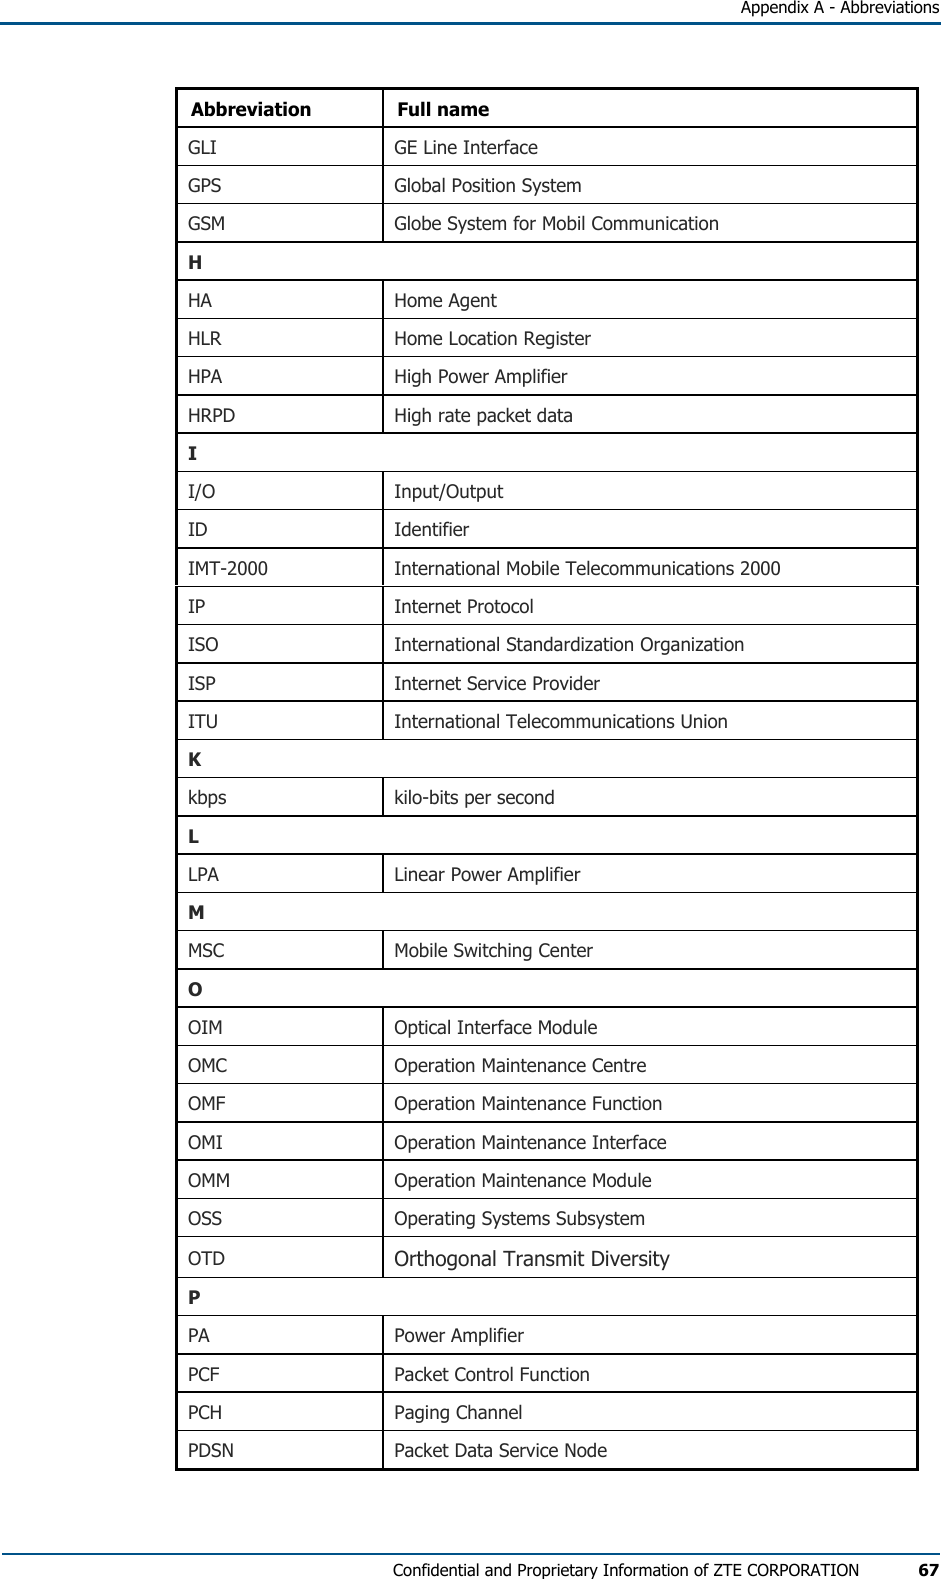   Appendix A - Abbreviations Confidential and Proprietary Information of ZTE CORPORATION 67 Abbreviation Full name GLI GE Line Interface GPS  Global Position System GSM  Globe System for Mobil Communication H HA Home Agent HLR  Home Location Register HPA  High Power Amplifier HRPD  High rate packet data I I/O Input/Output ID Identifier IMT-2000  International Mobile Telecommunications 2000 IP Internet Protocol ISO  International Standardization Organization ISP  Internet Service Provider ITU  International Telecommunications Union K kbps  kilo-bits per second L LPA  Linear Power Amplifier M MSC  Mobile Switching Center O OIM  Optical Interface Module OMC  Operation Maintenance Centre OMF  Operation Maintenance Function OMI  Operation Maintenance Interface OMM  Operation Maintenance Module OSS  Operating Systems Subsystem OTD  Orthogonal Transmit Diversity P PA Power Amplifier PCF  Packet Control Function PCH Paging Channel PDSN  Packet Data Service Node 